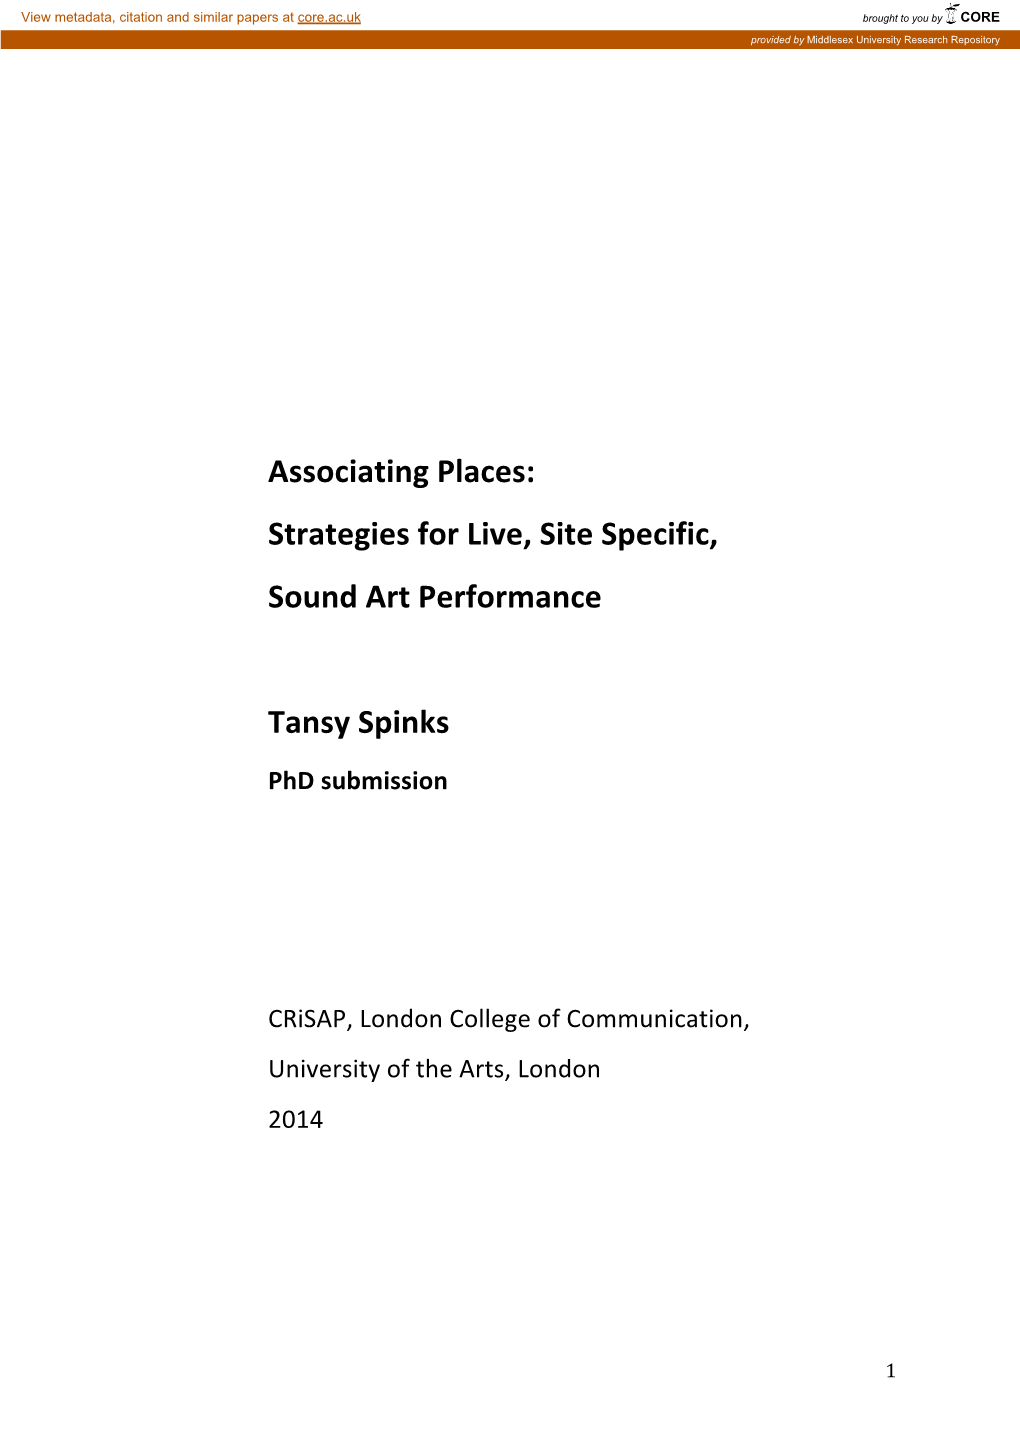 Associating Places: Strategies for Live, Site Specific, Sound Art Performance